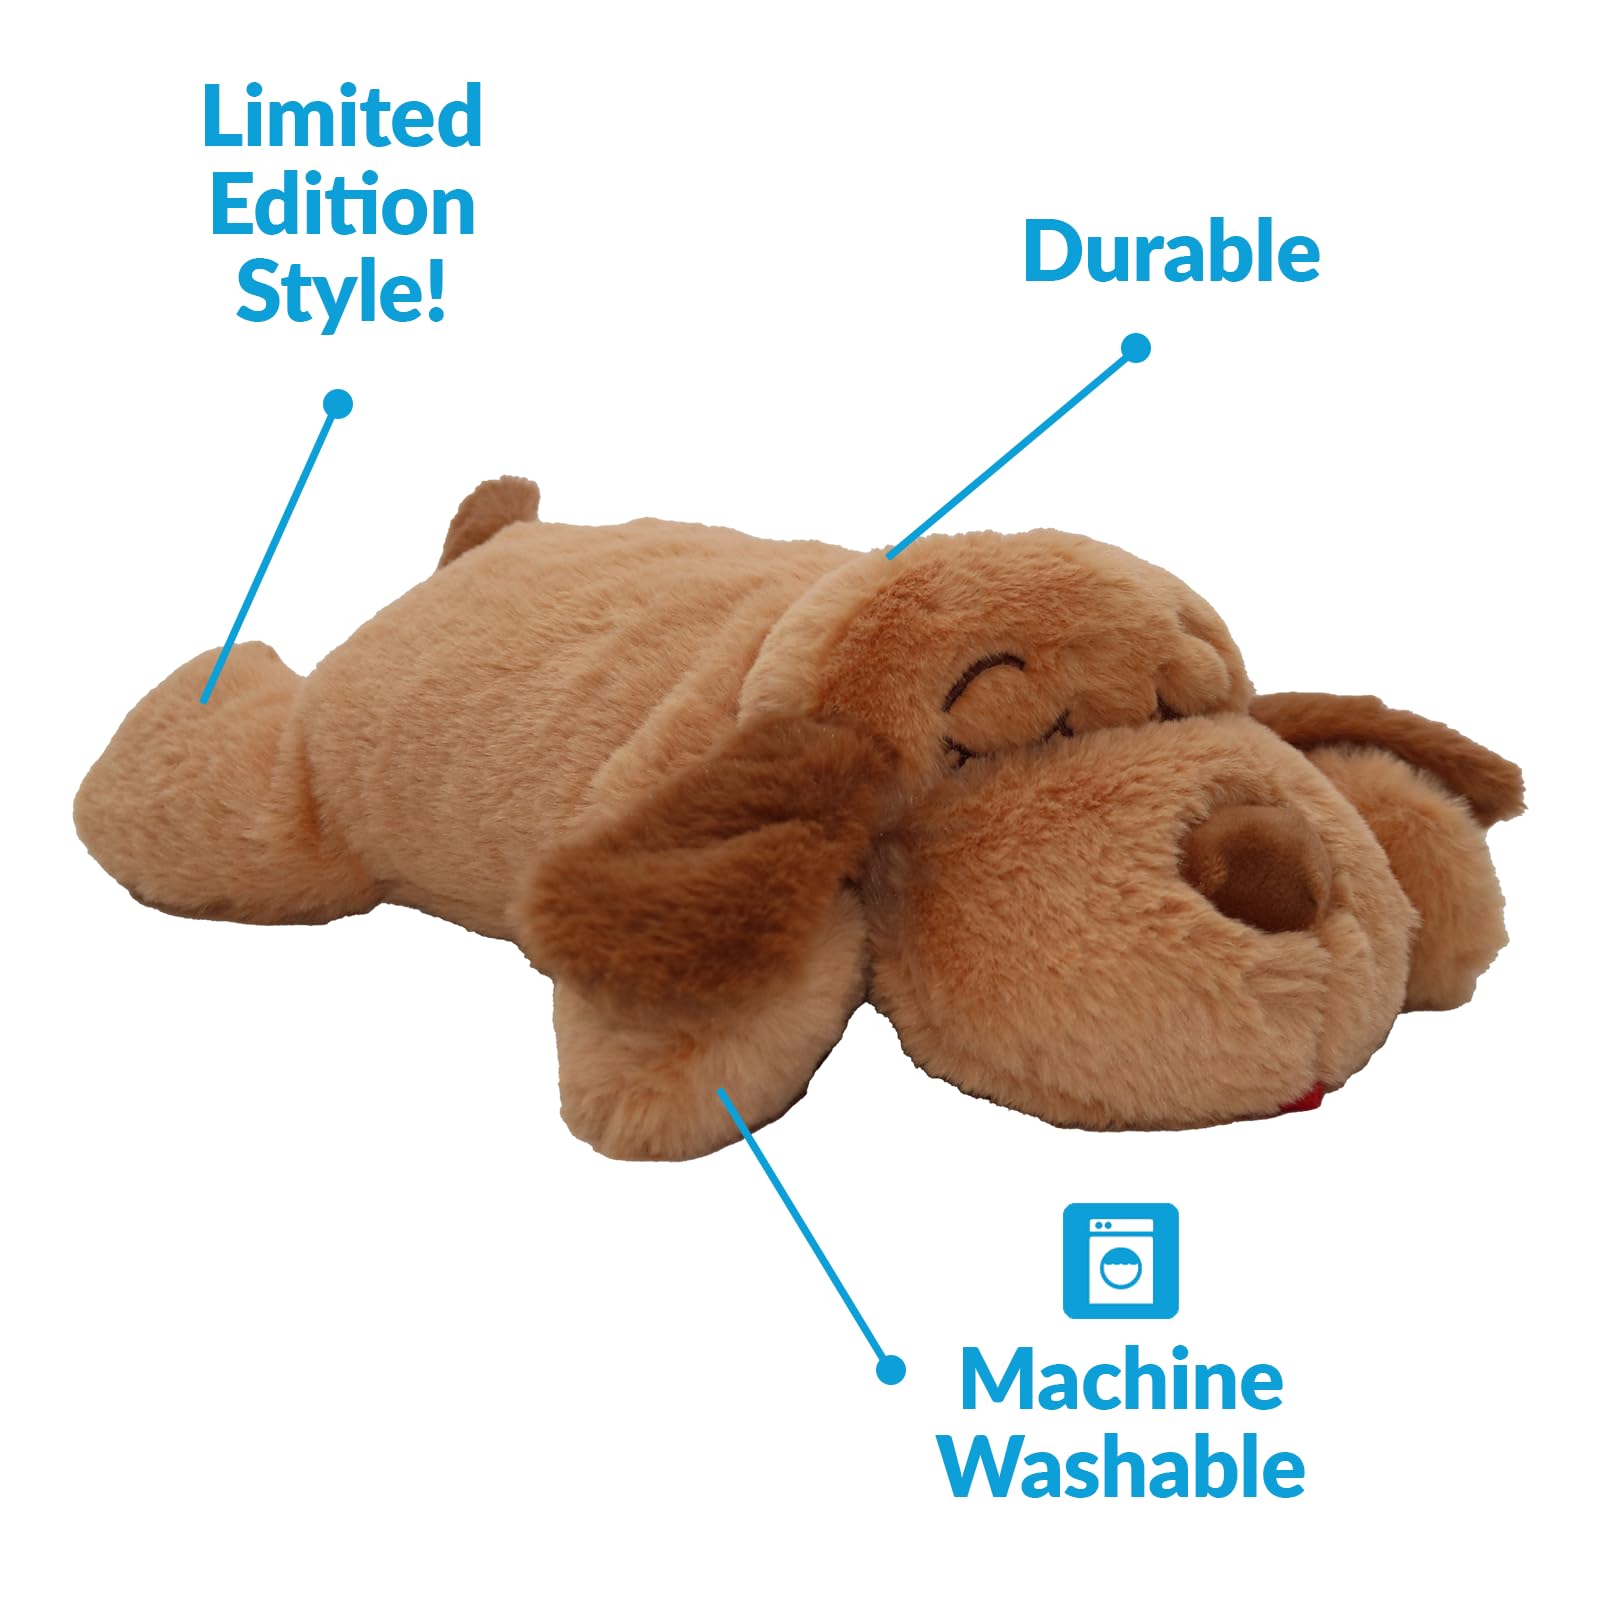 SmartPetLove Limited Edition - Original Snuggle Puppy Heartbeat Stuffed Toy for Dogs. Pet Anxiety Relief and Calming Aid, Comfort Toy for Behavioral Training in Sleeping Biscuit